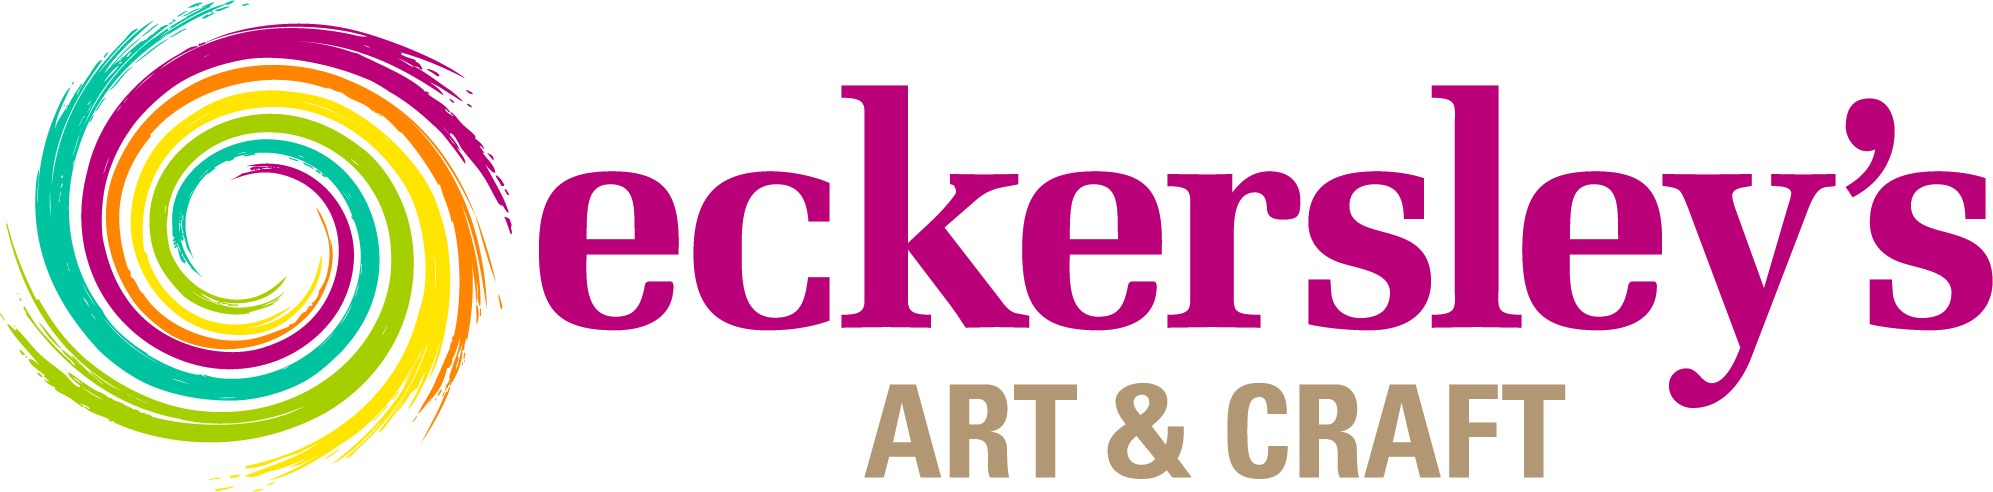 Eckerley's Art and Craft logo in colour